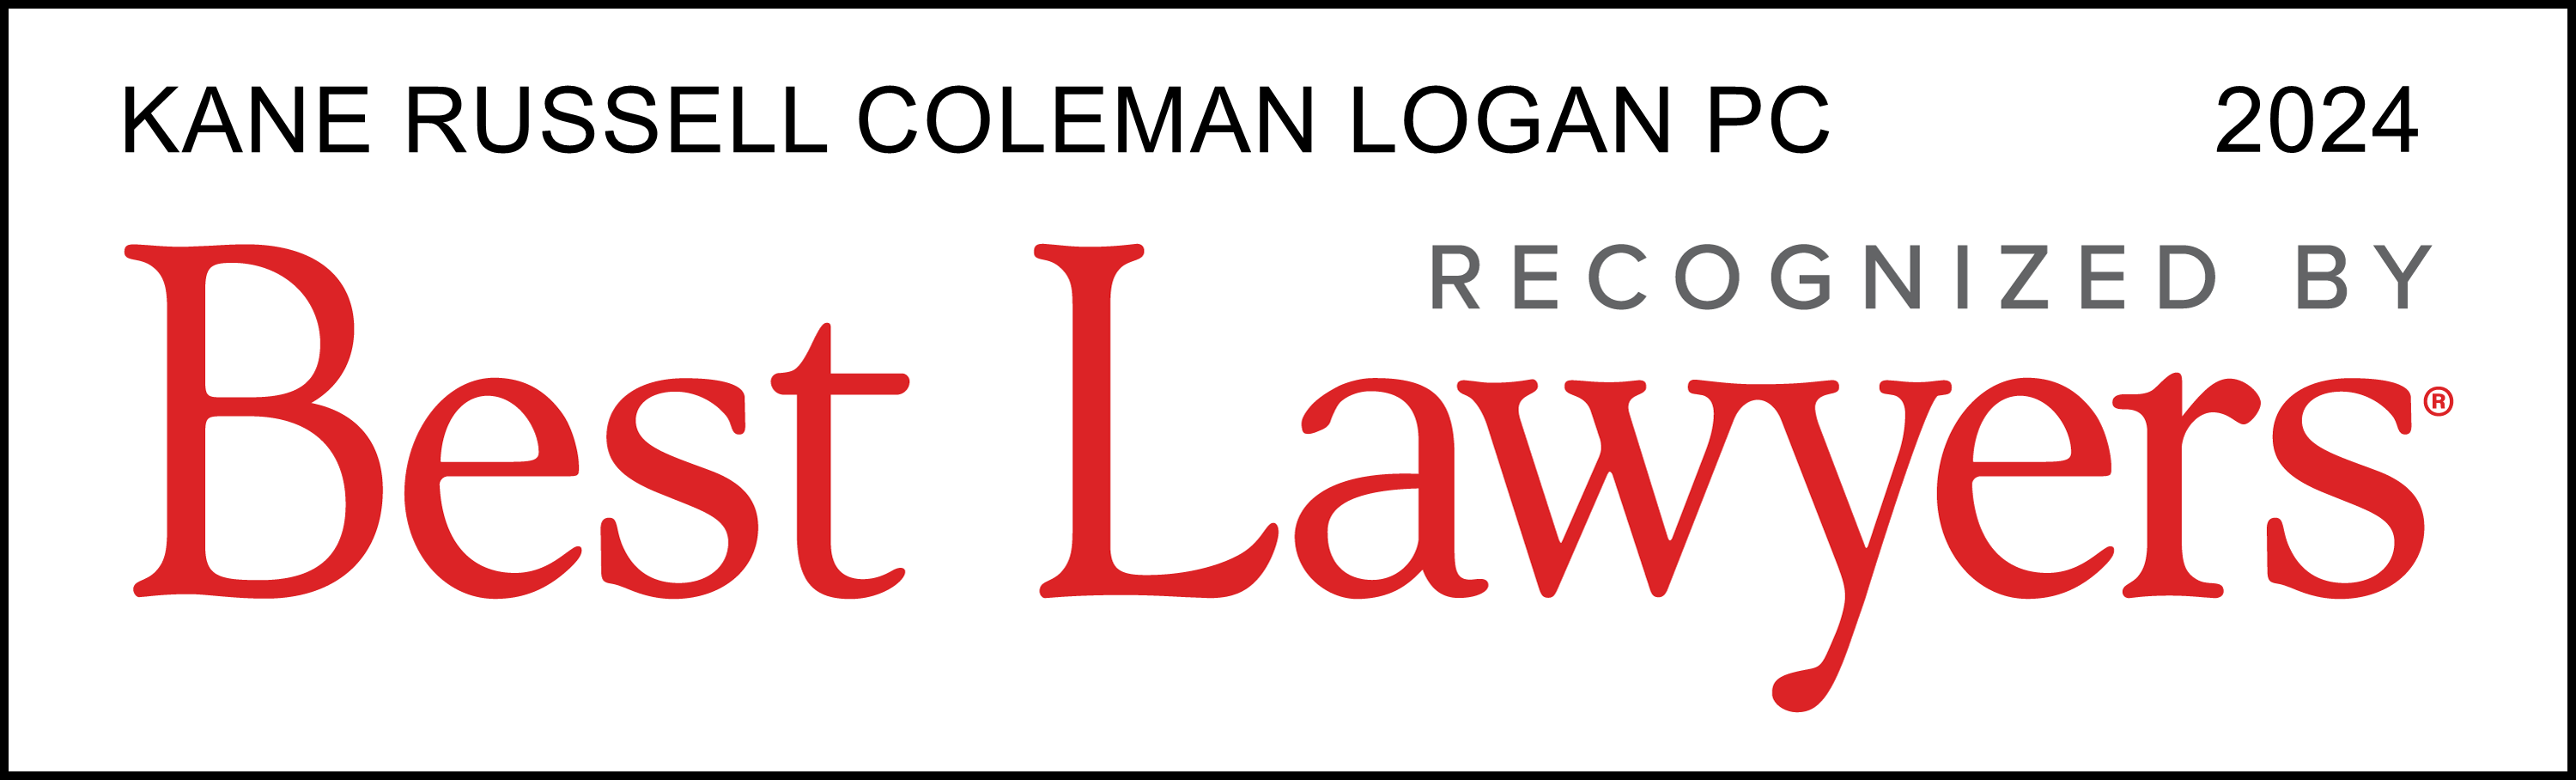 Kane Russell Coleman Logan PC
2024
Recognized by Best Lawyers